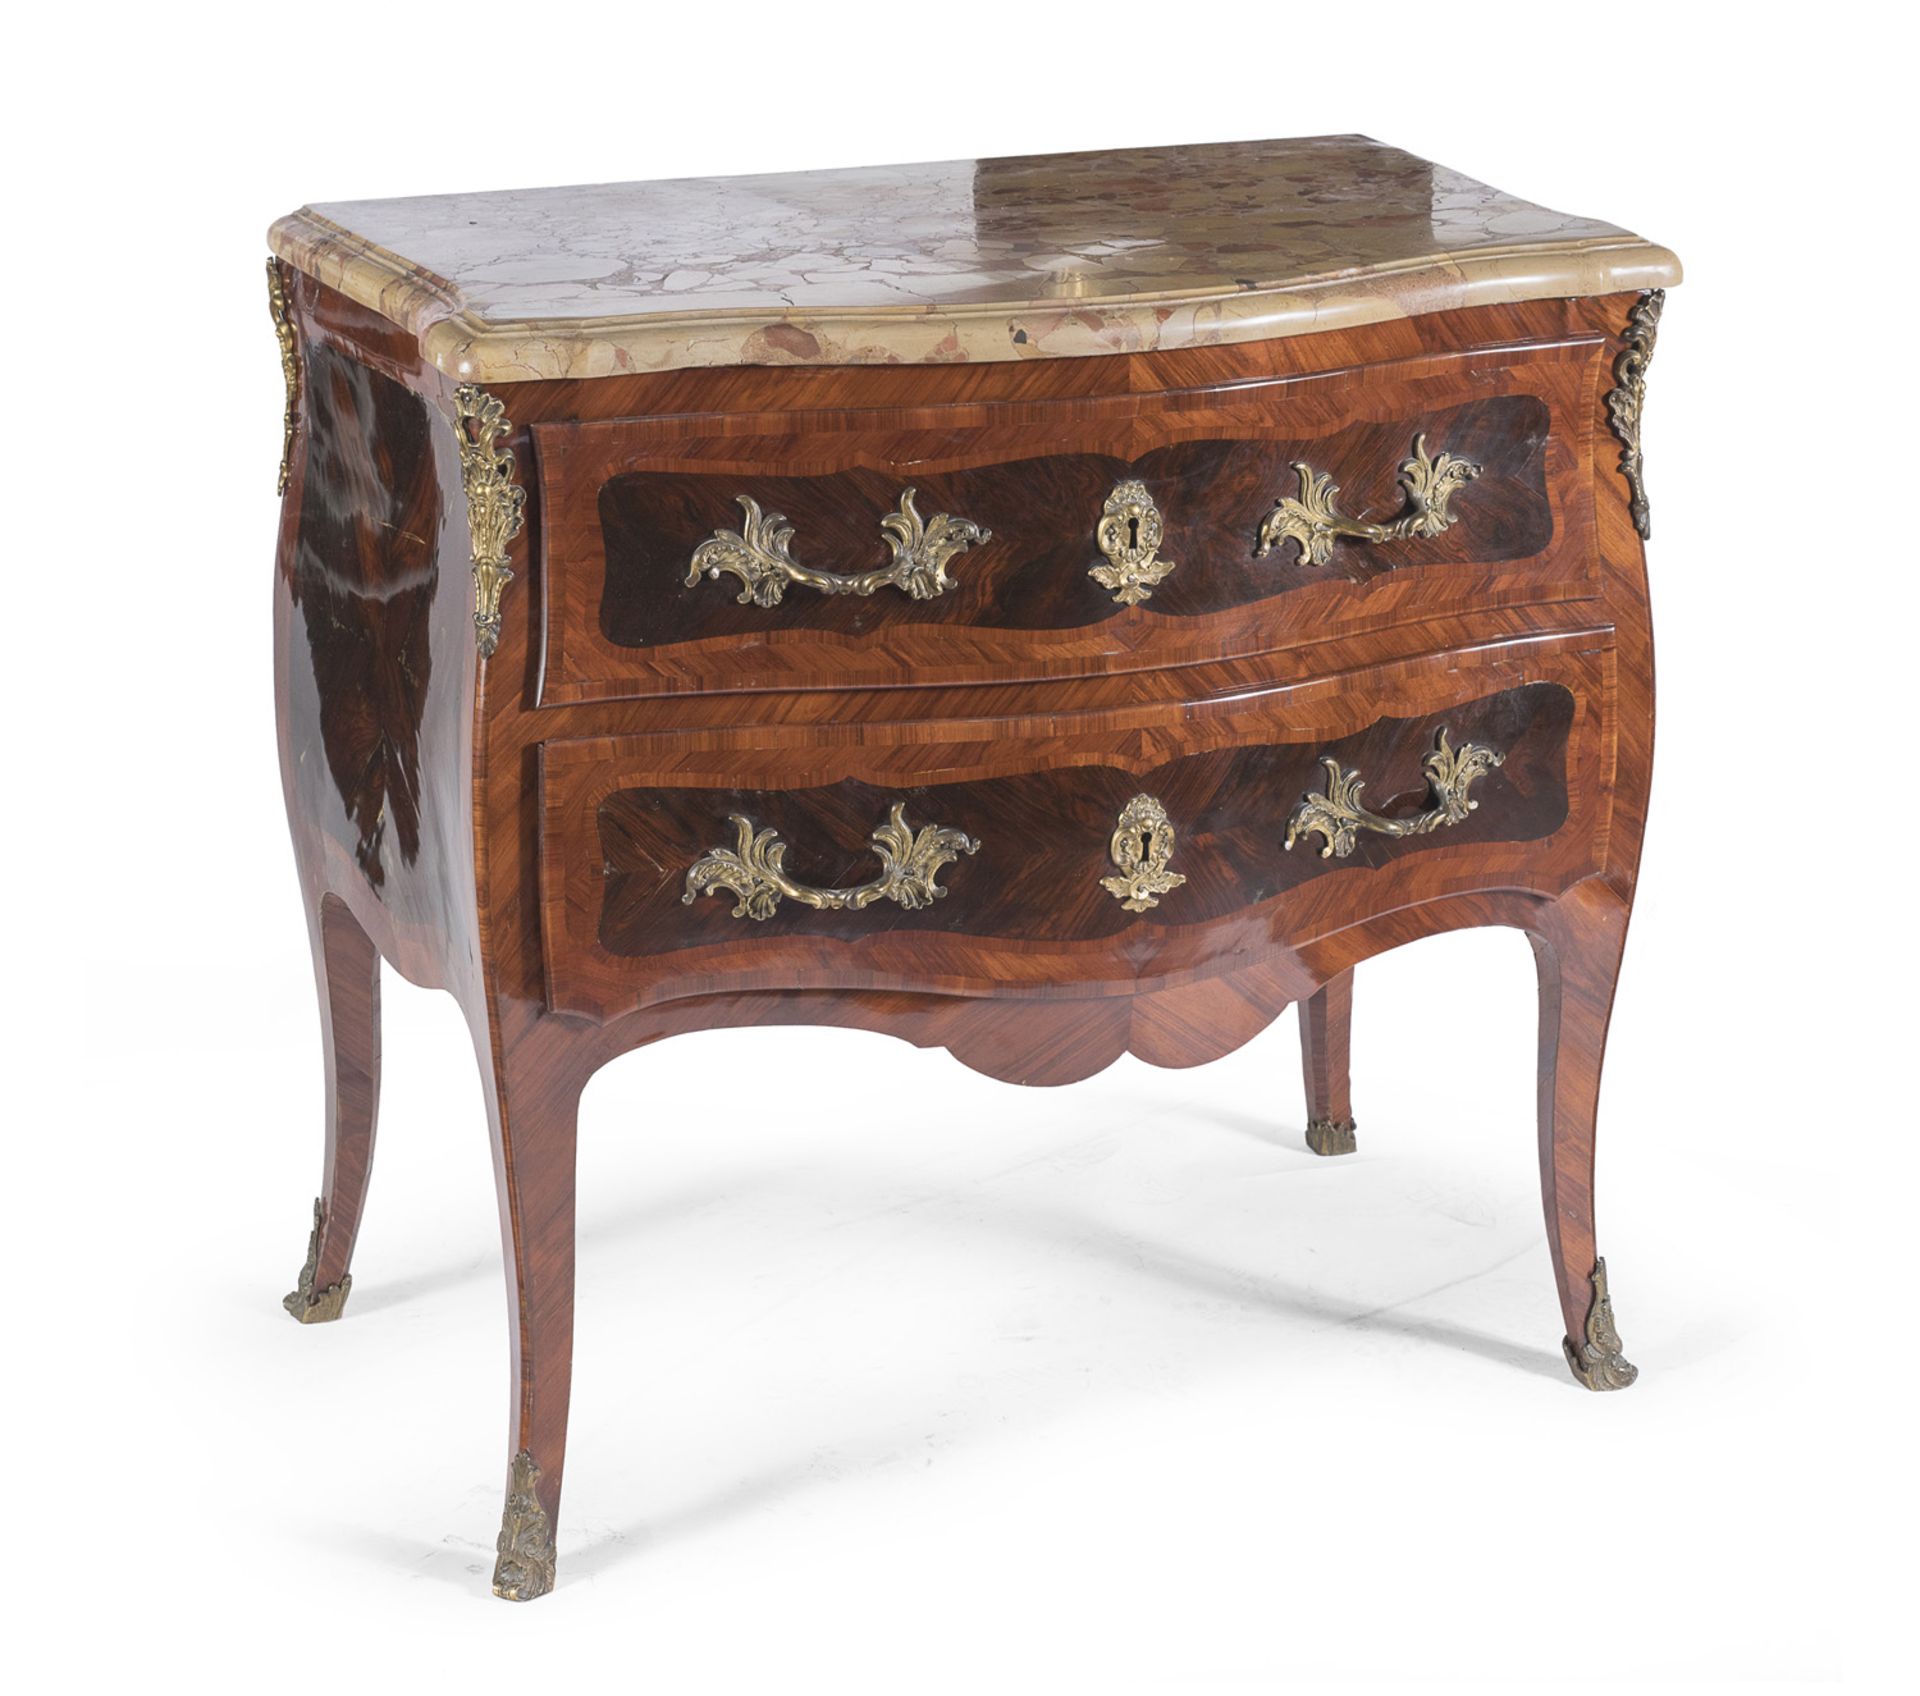 SMALL COMMODE FRANCE 18TH CENTURY